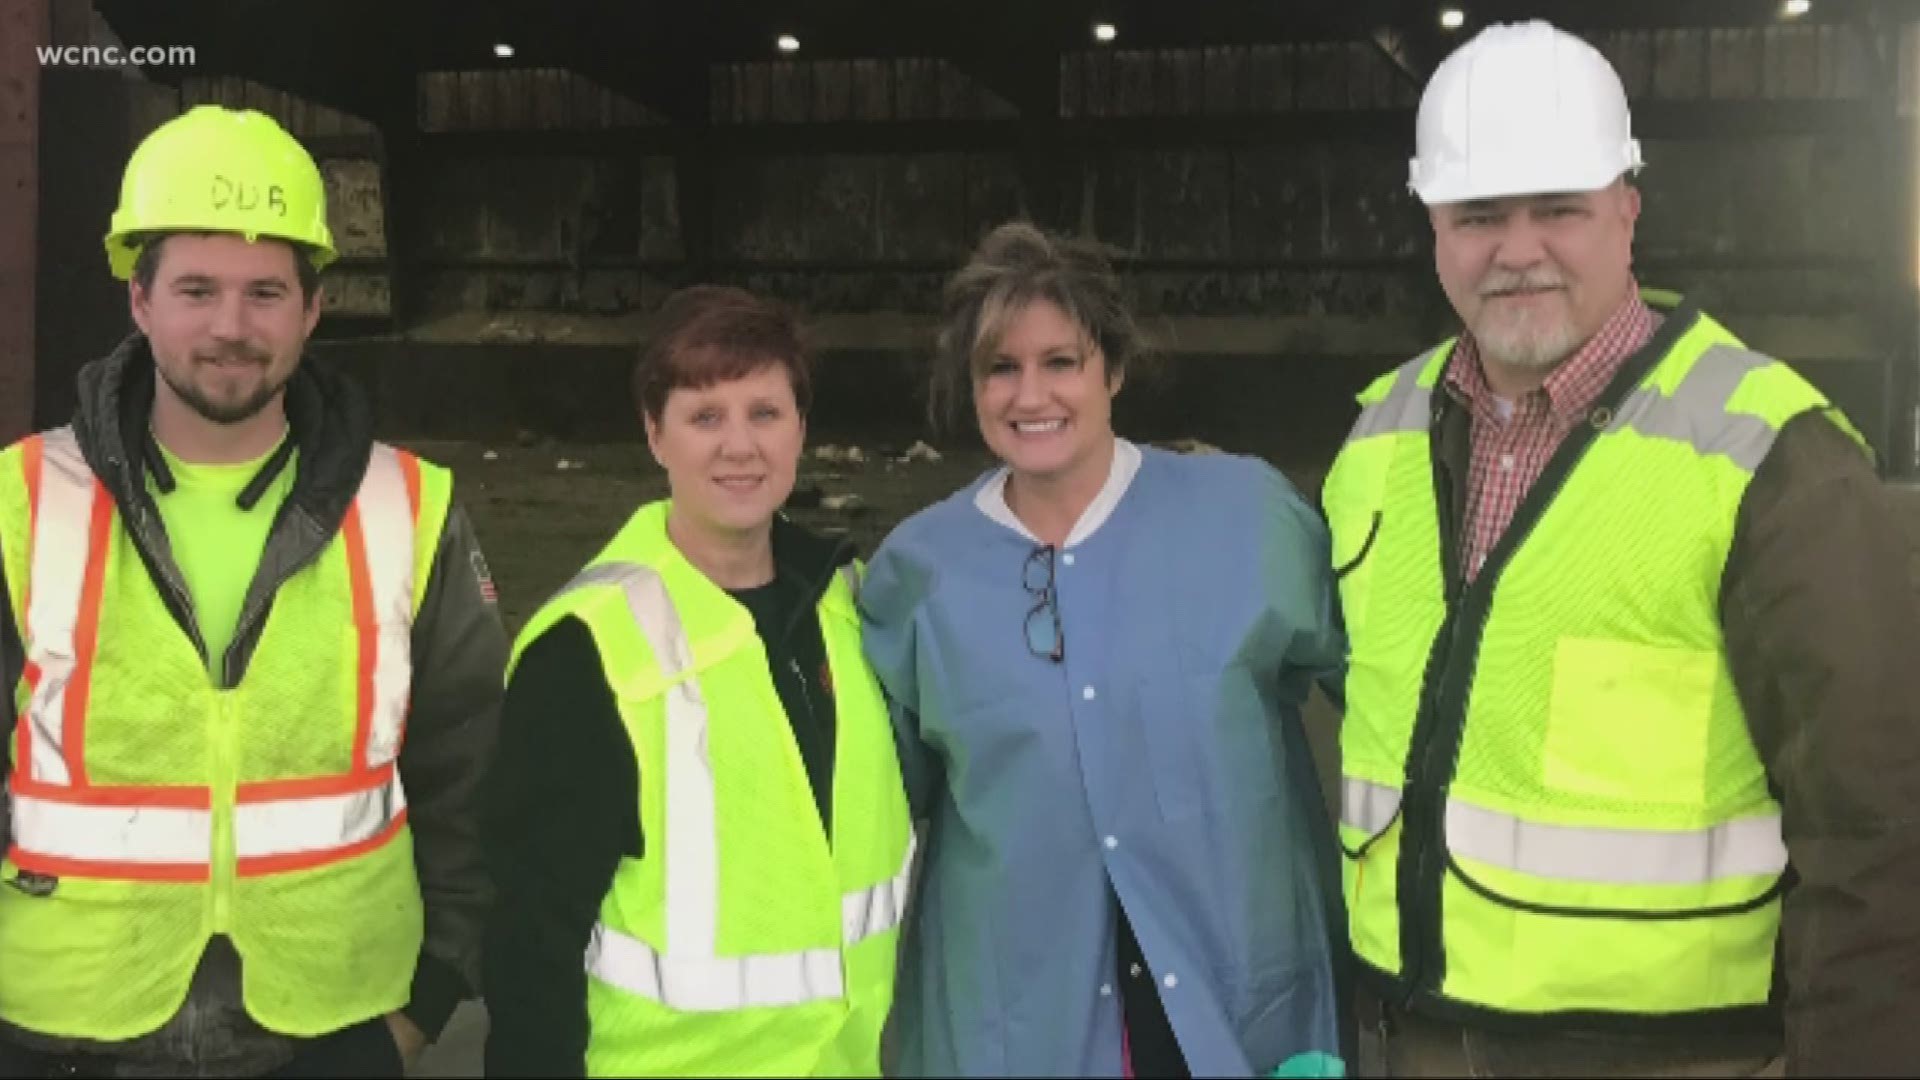 The Fort Mill mother accidentally tossed her ring in the trash just before Christmas, but York County waste management employees helped her reunite with her diamonds just hours later.